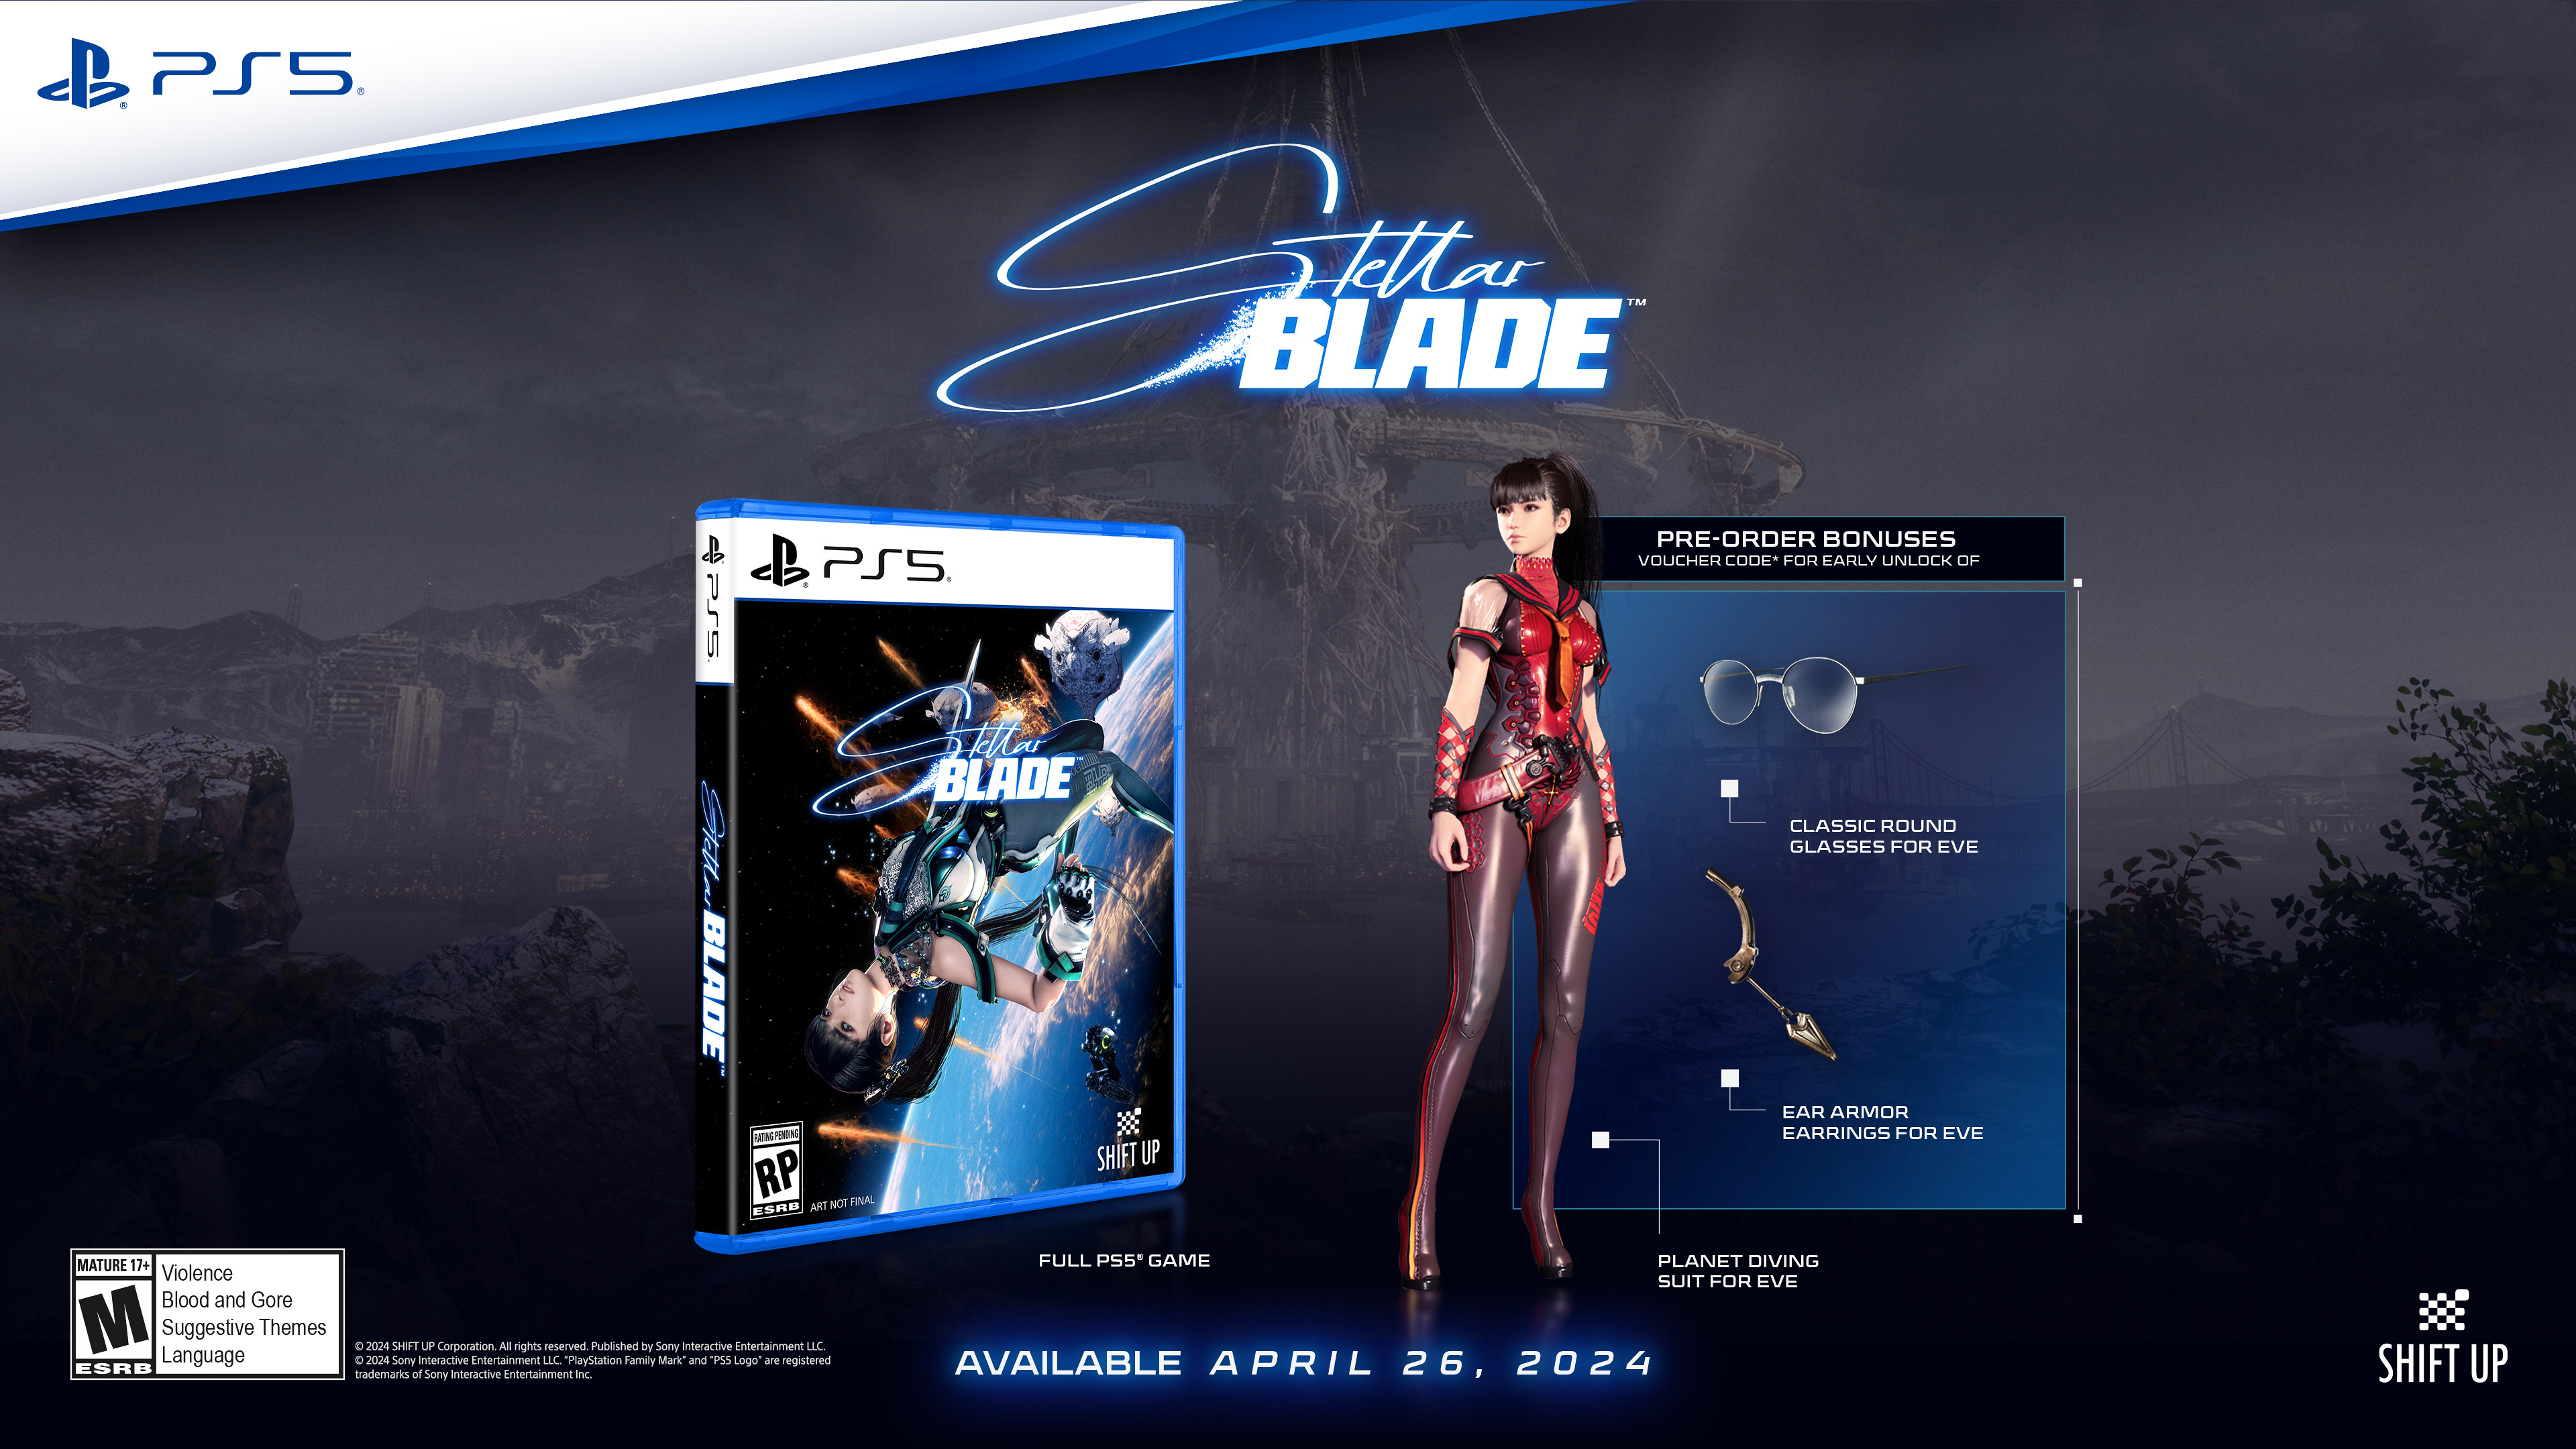 The standard edition of Stellar Blade includes preorder bonuses in the form of a voucher code that offers an early unlock of 1. Classic Round Glasses for Eve, 2. Ear Armor Earrings for Eve and 3. Planet Diving Suit for Eve